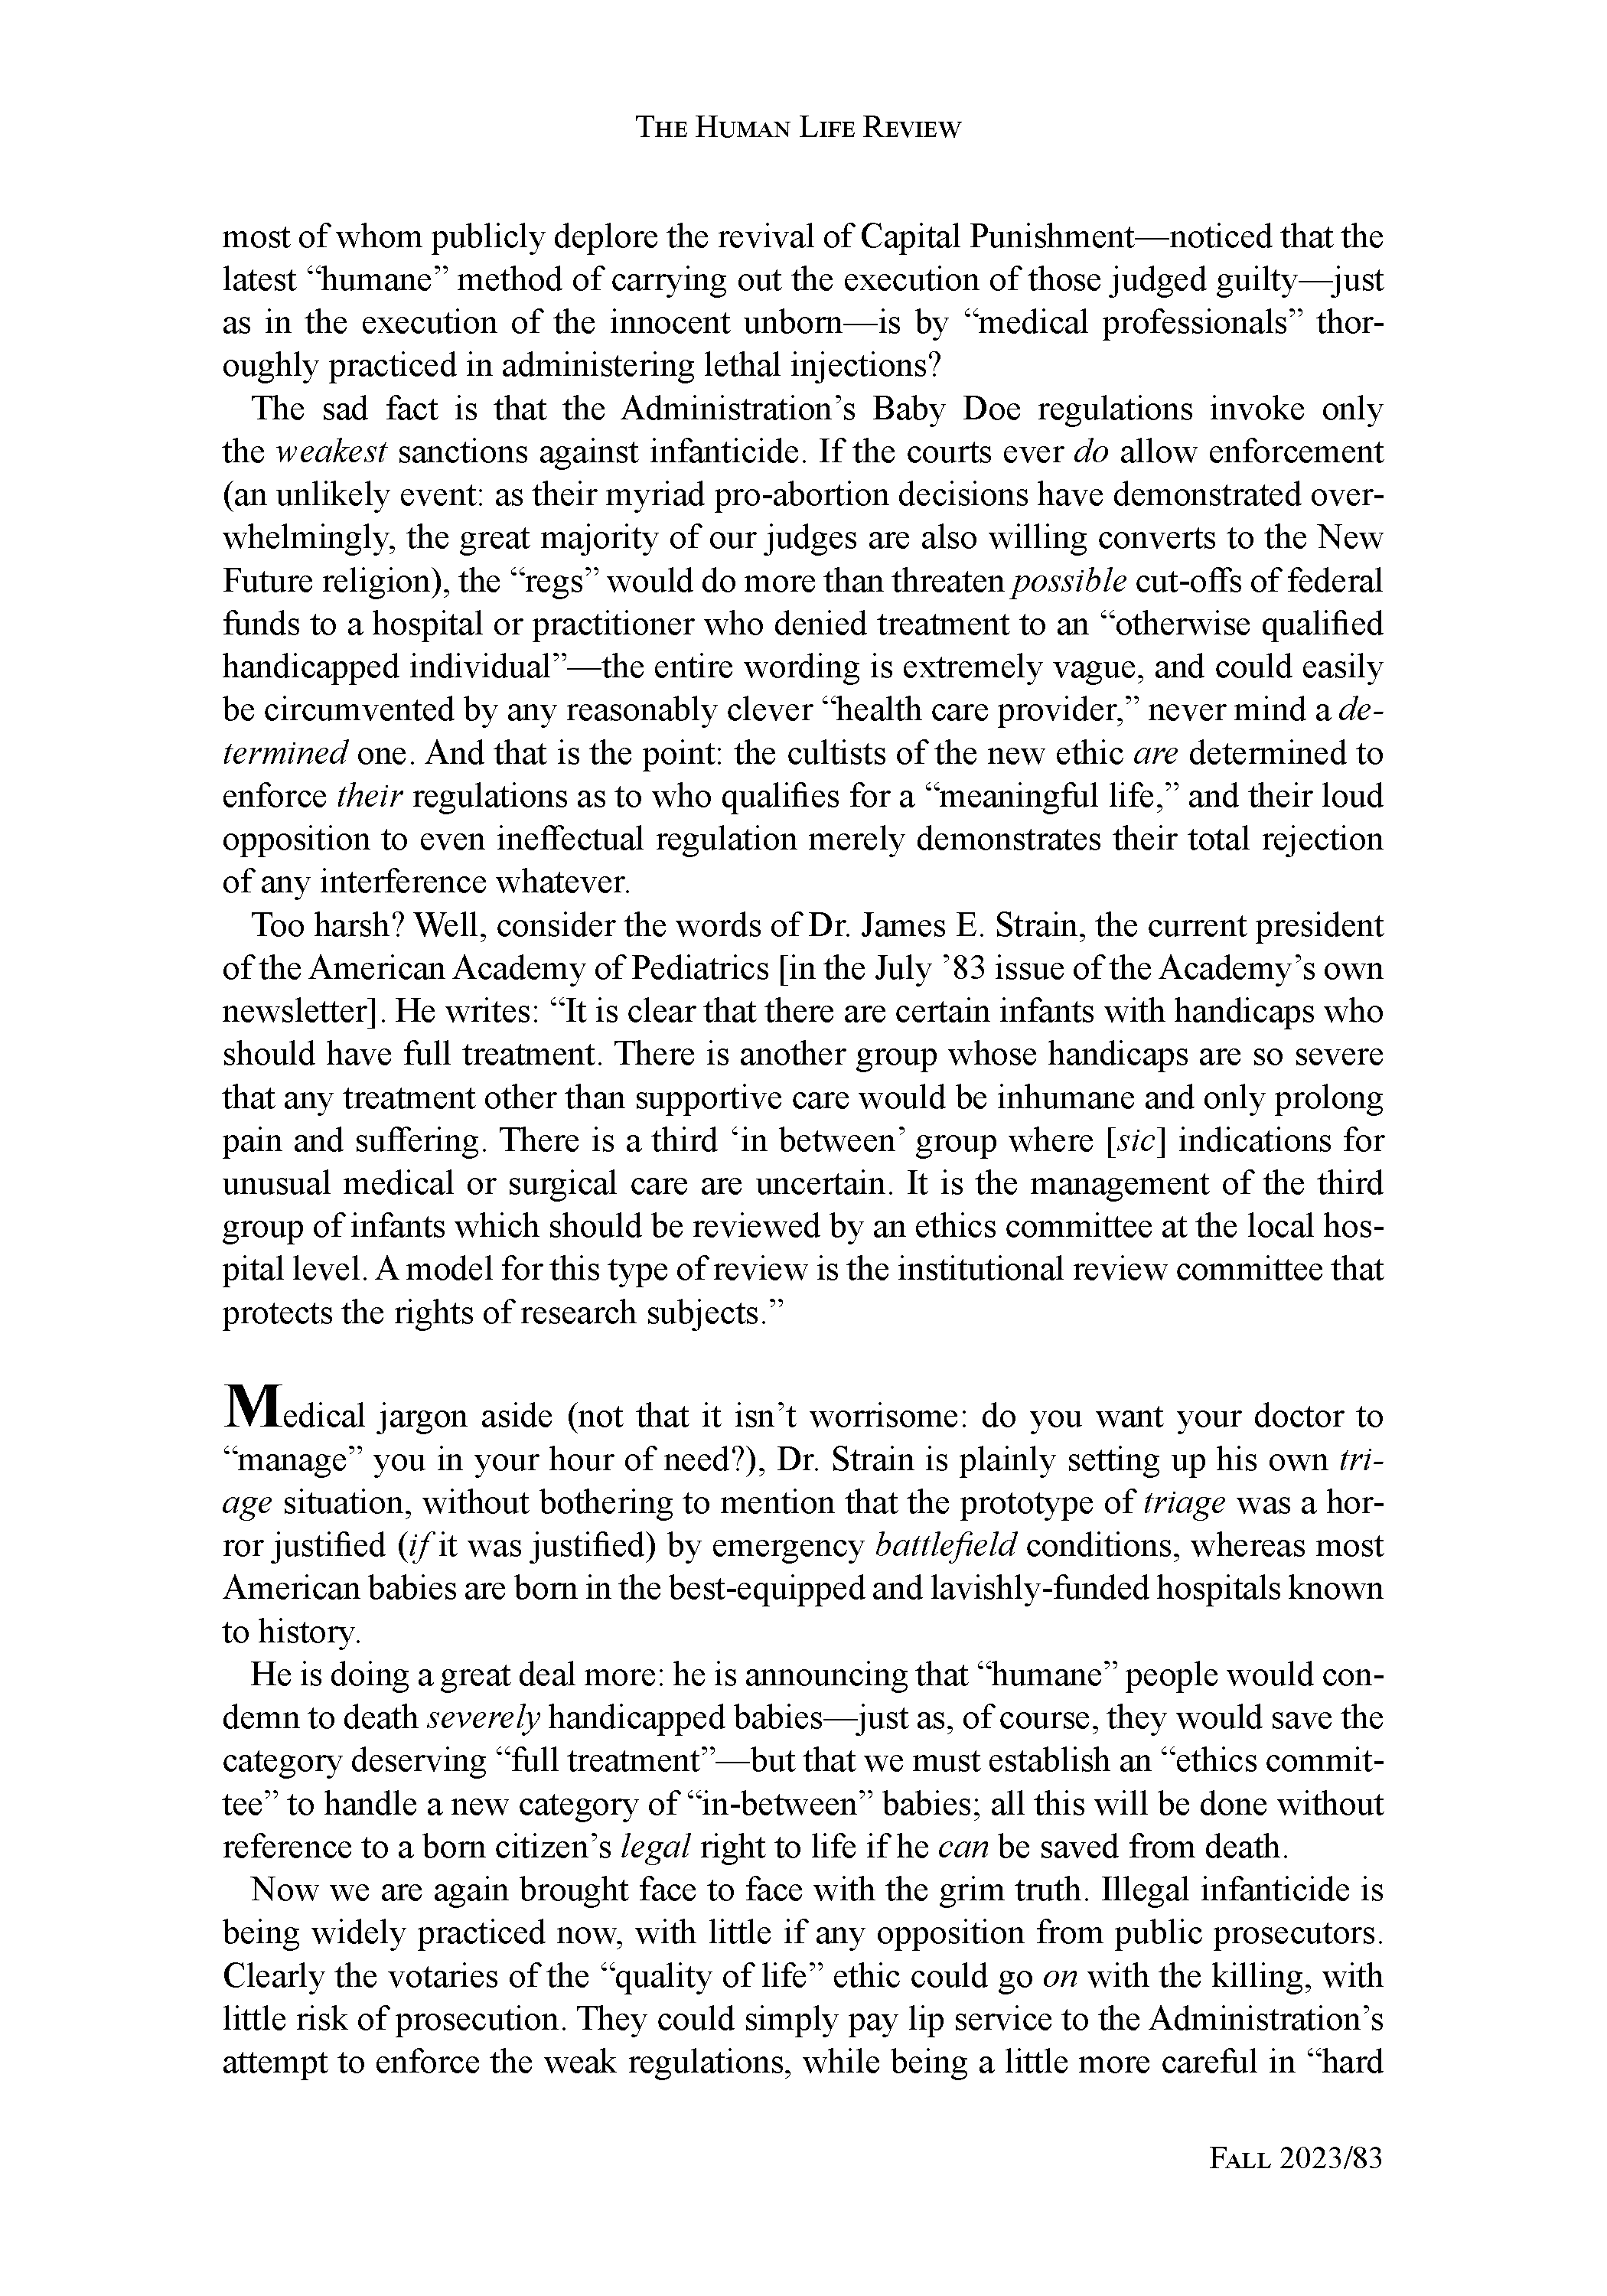 Page 85